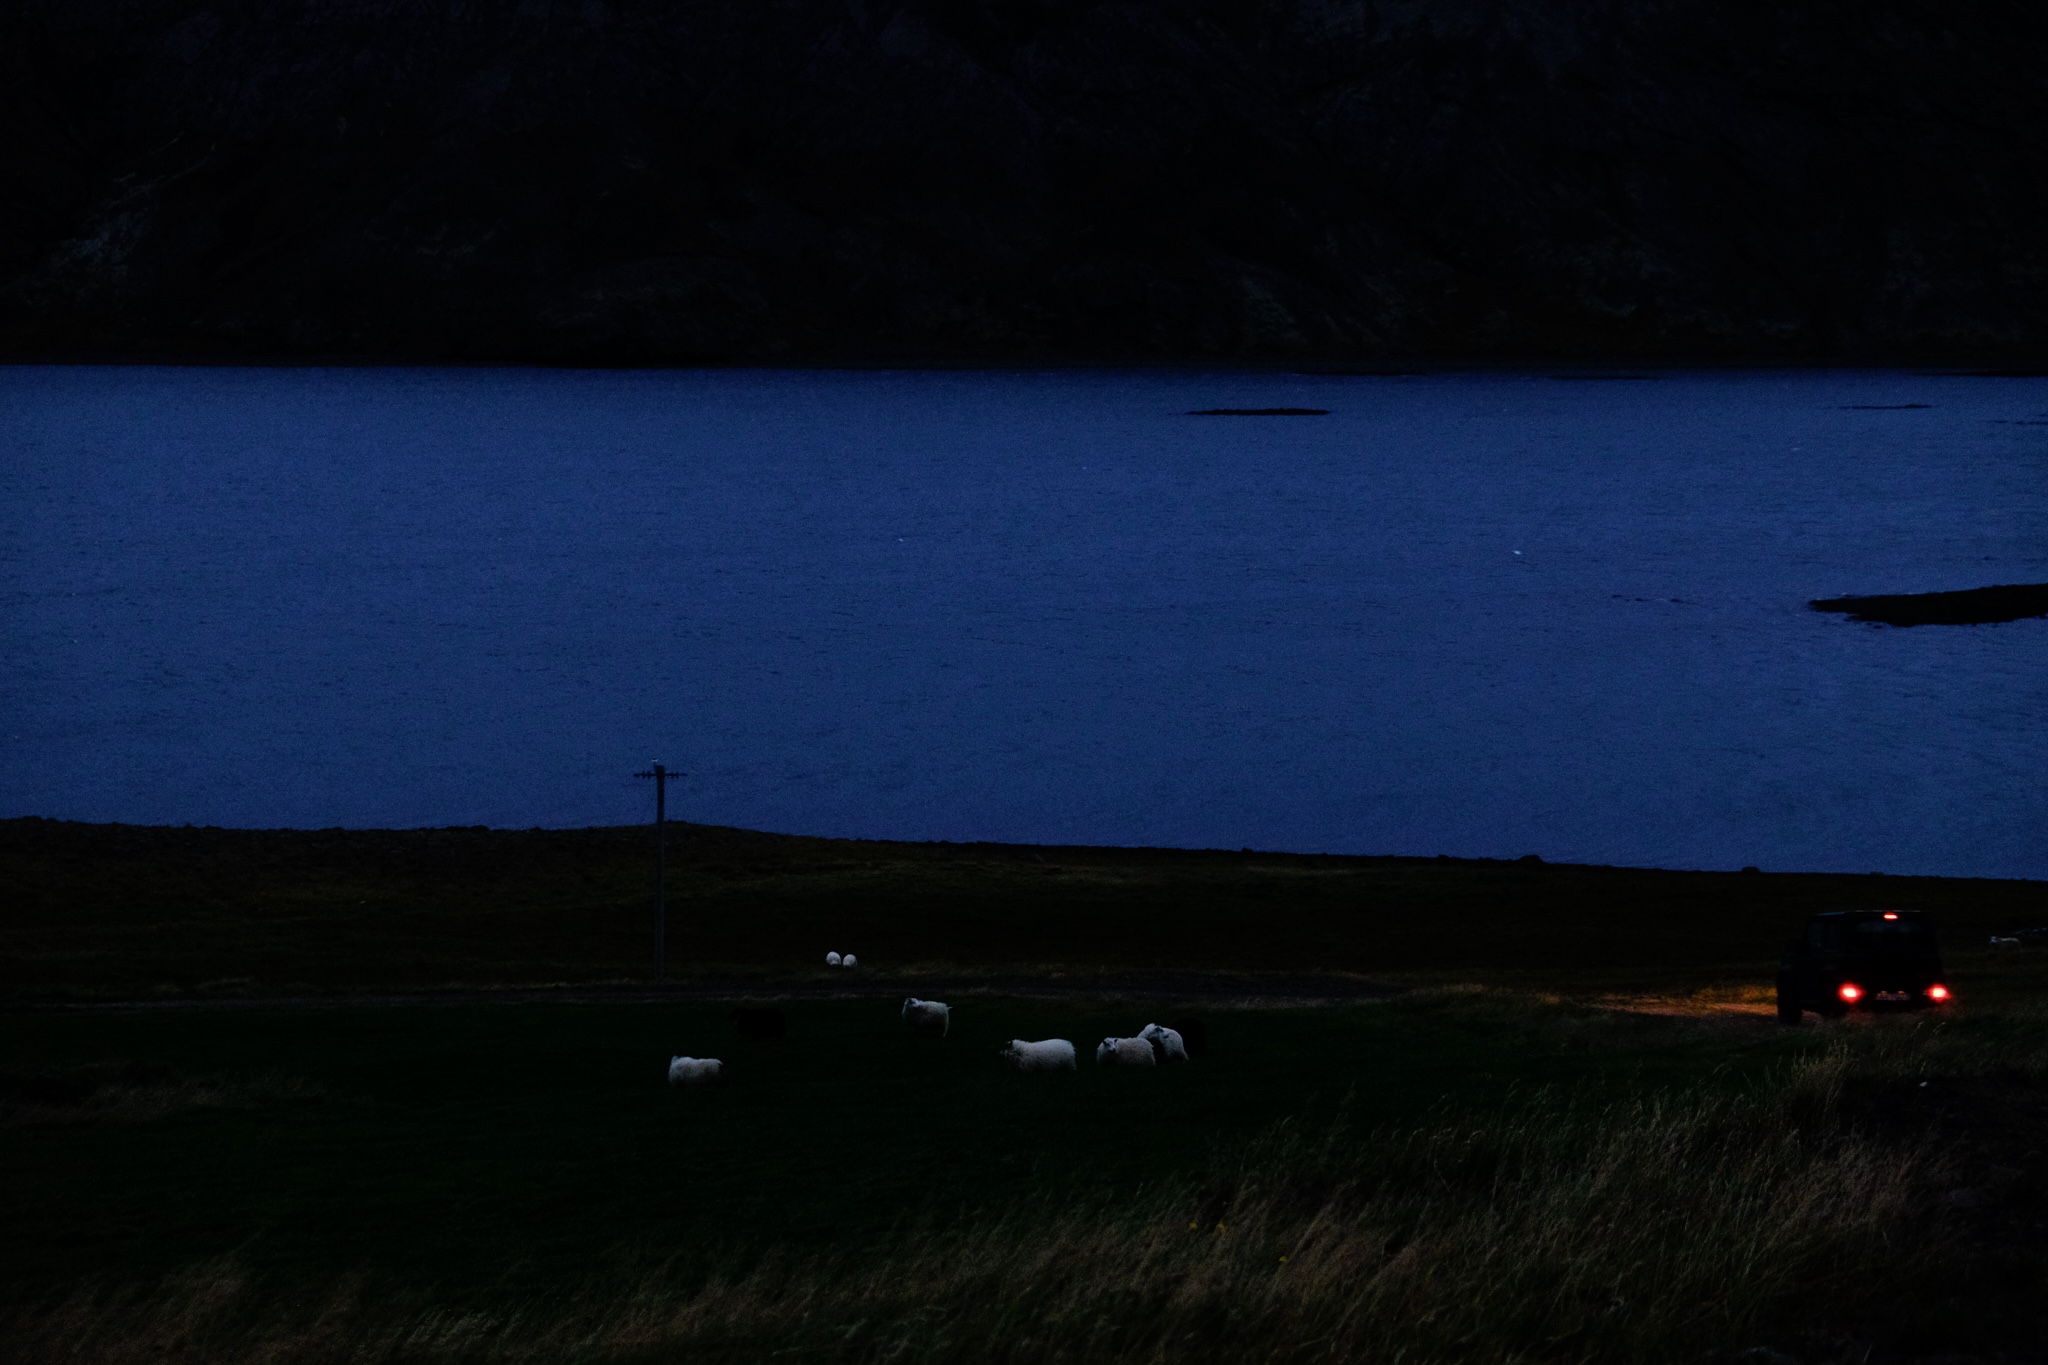 A darkening evening of a farm with sheep and a lake, a car drives down the road with it's headlamps on